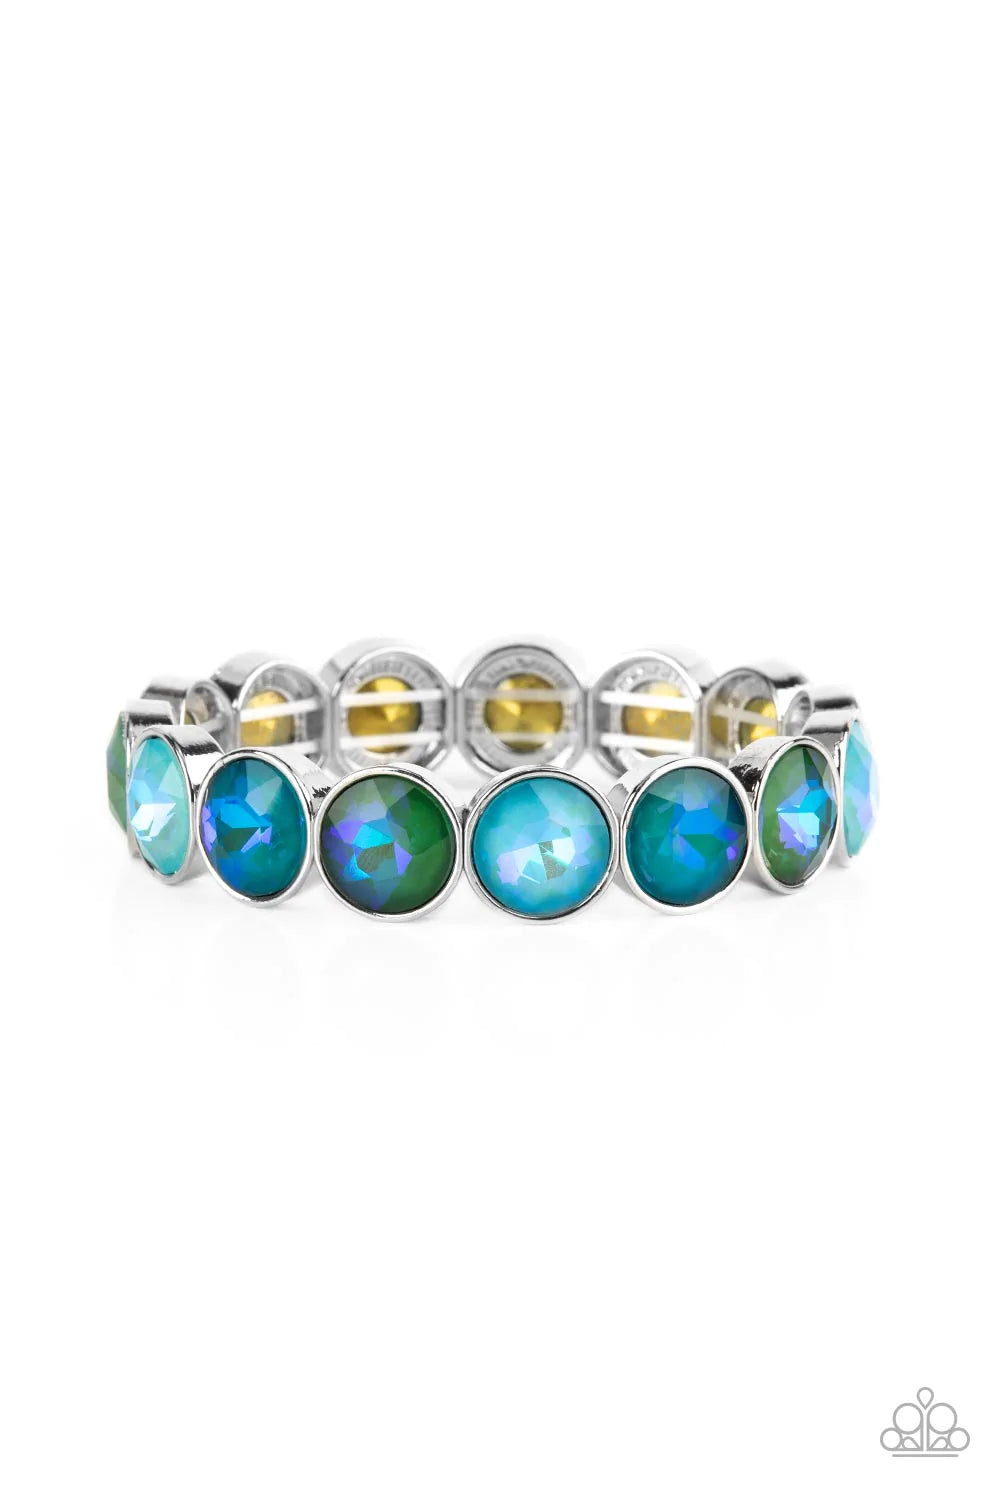 Paparazzi Accessories Radiant Repeat - Green Encased in sleek silver fittings, a sparkly series of opalescent green and blue rhinestones are threaded along stretchy bands around the wrist for a radiant finish. Sold as one individual bracelet. Jewelry